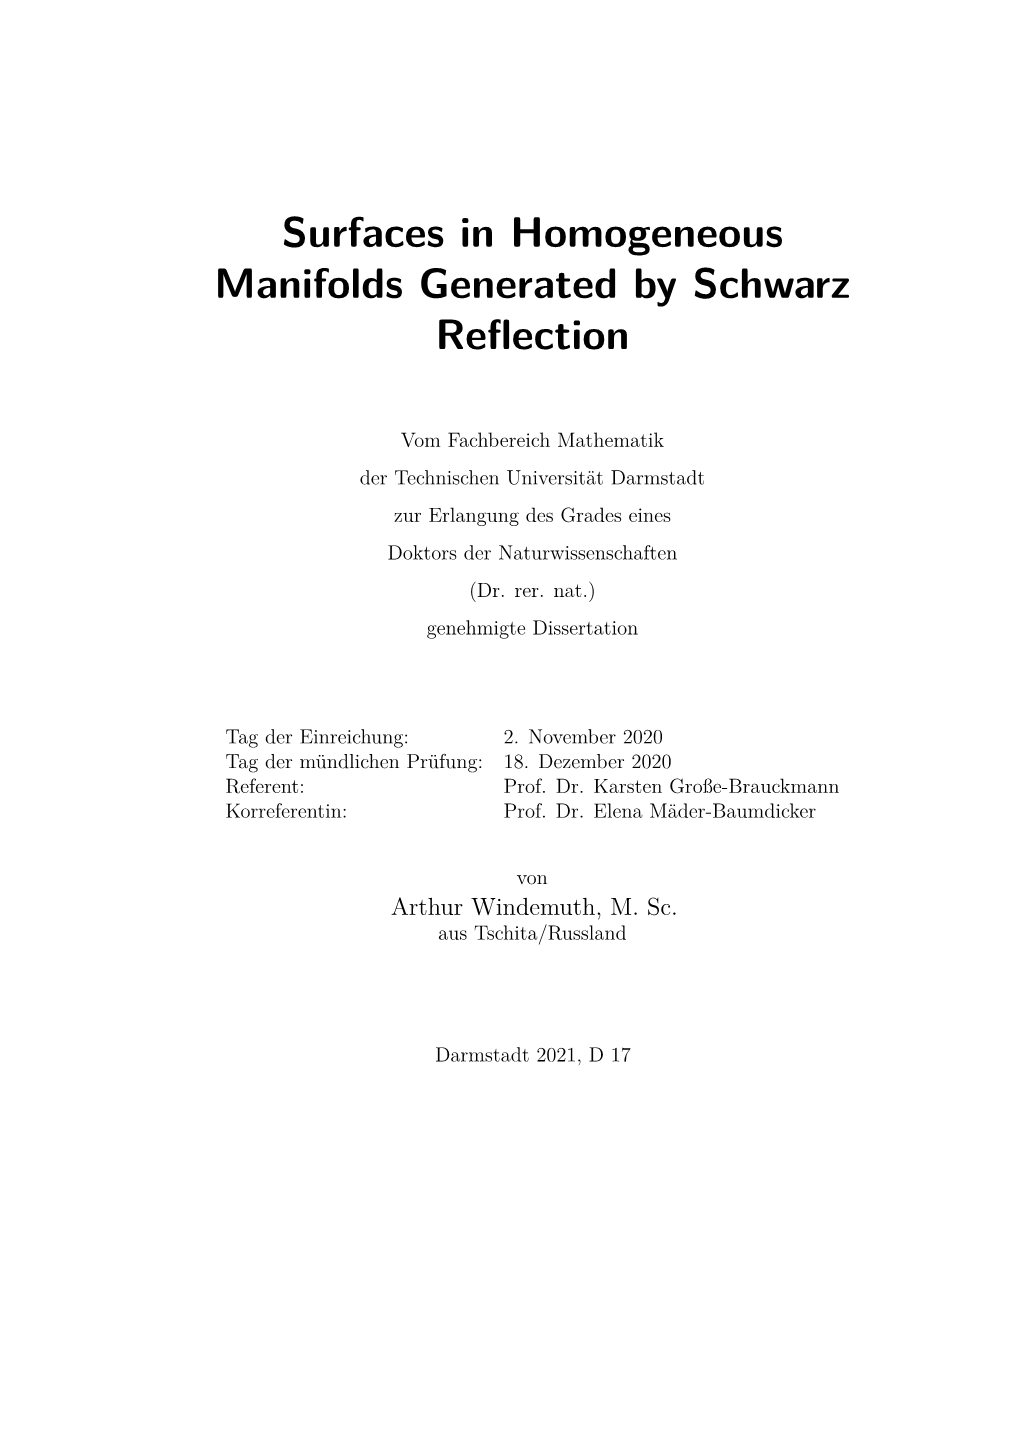 Surfaces in Homogeneous Manifolds Generated by Schwarz Reflection